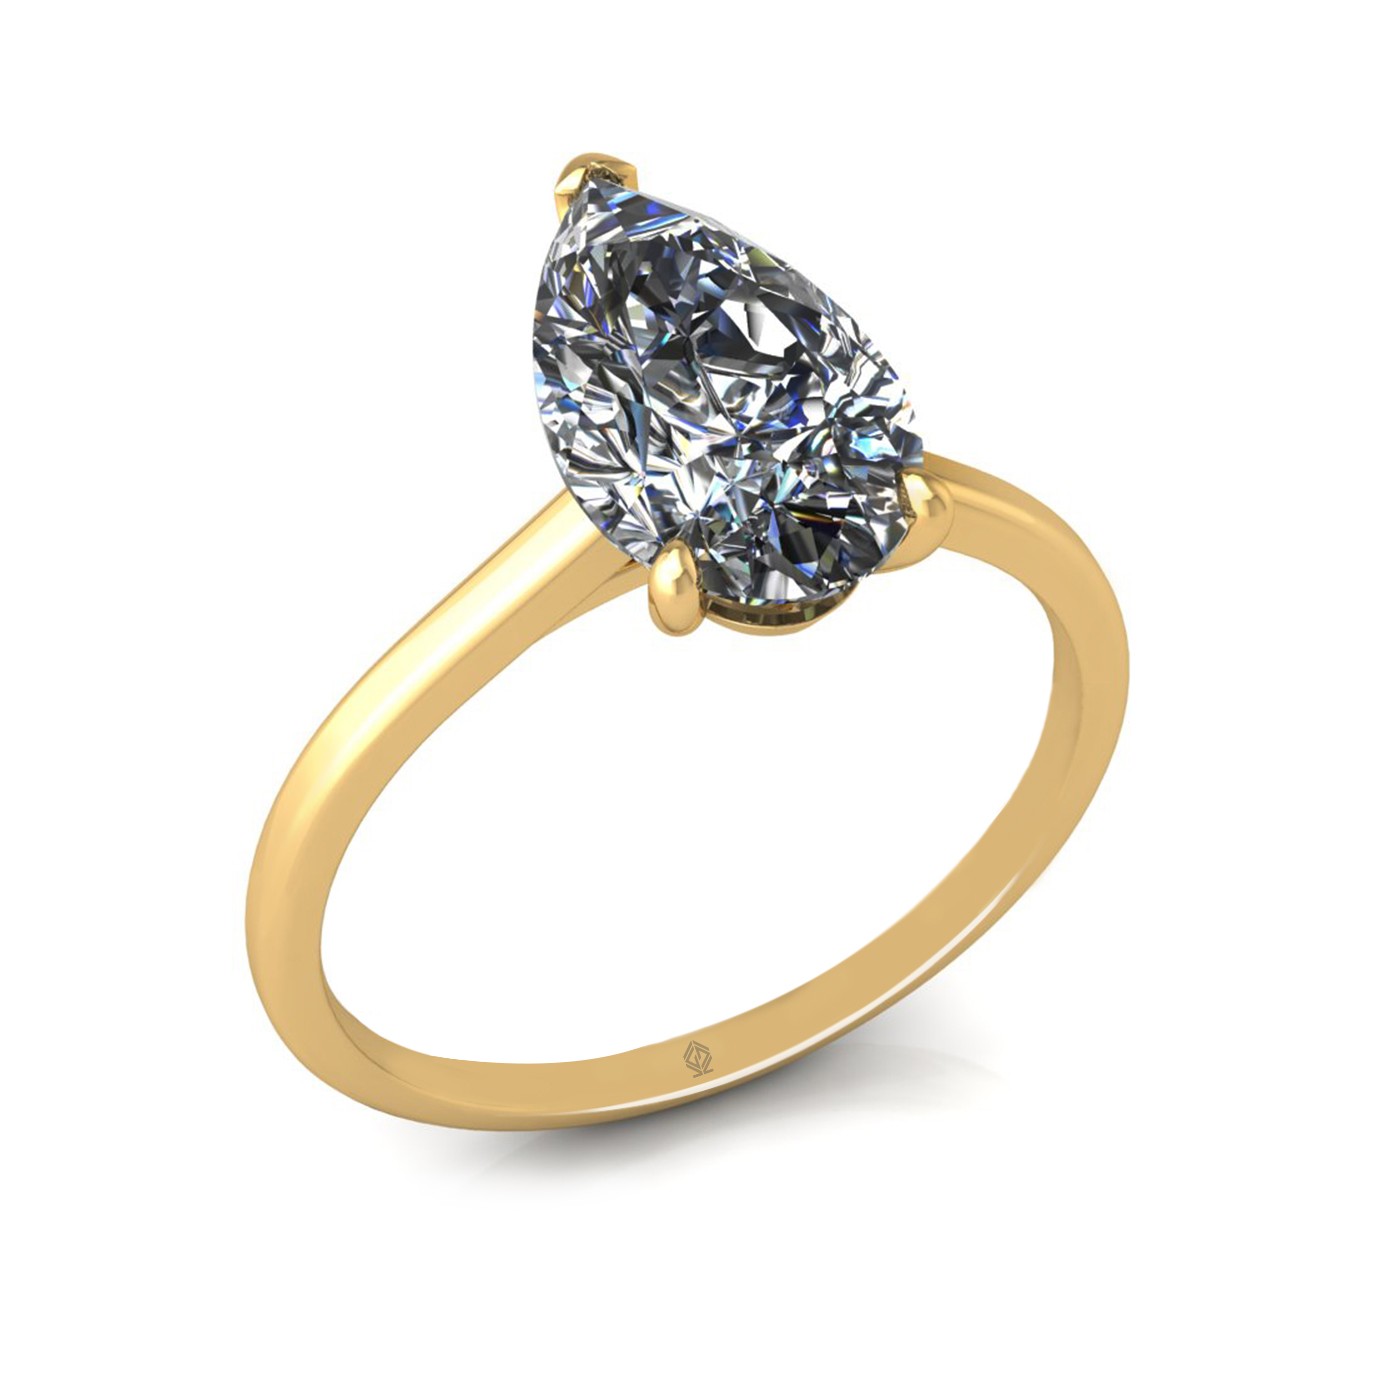 18k yellow gold  1,50 ct 3 prongs solitaire pear cut diamond engagement ring with whisper thin band